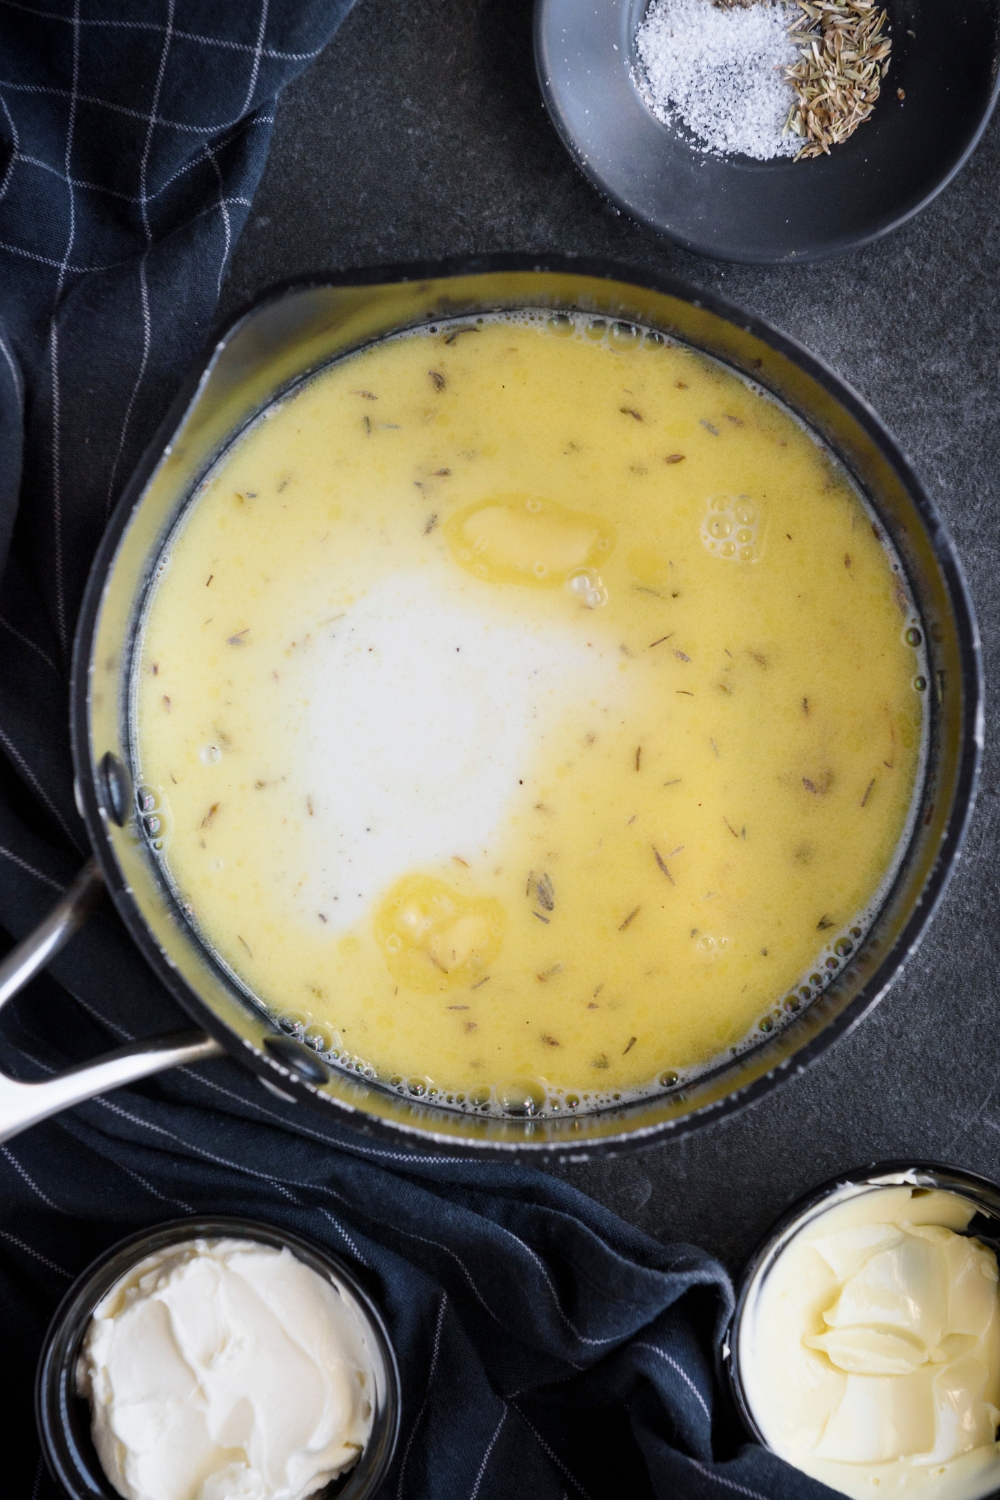 Milk, butter, and seasonings are in a silver sauce pan on a black counter.